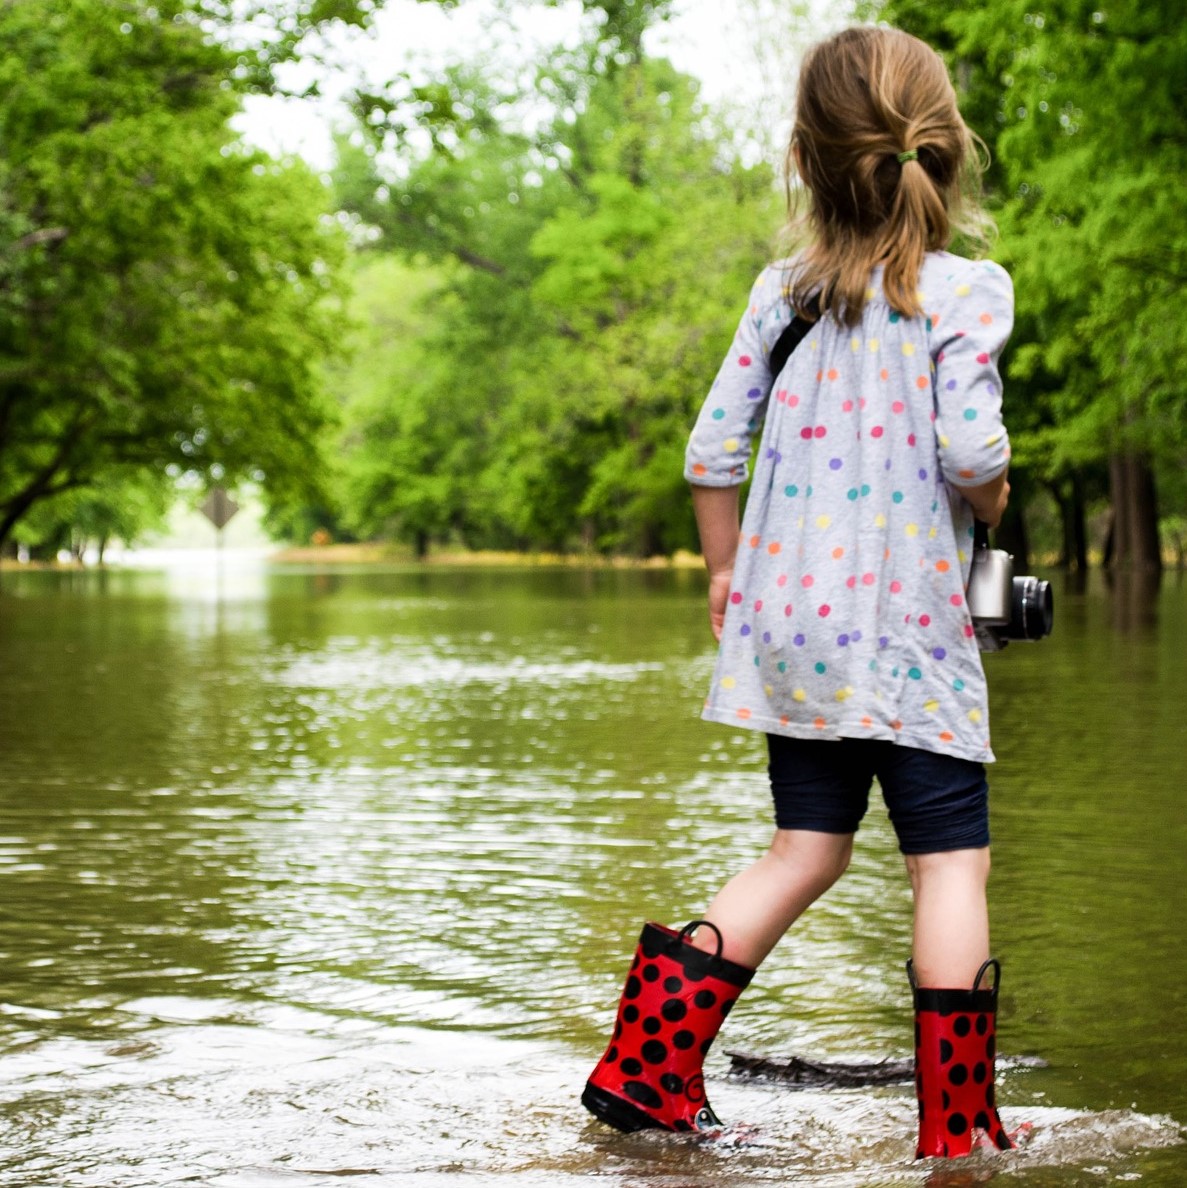 An outdoor scene. The ground is hidden as it is covered in water. Trees rise from the water in the background.  In the foreground a young girl has her back to us: she looks towards the trees while standing in the water